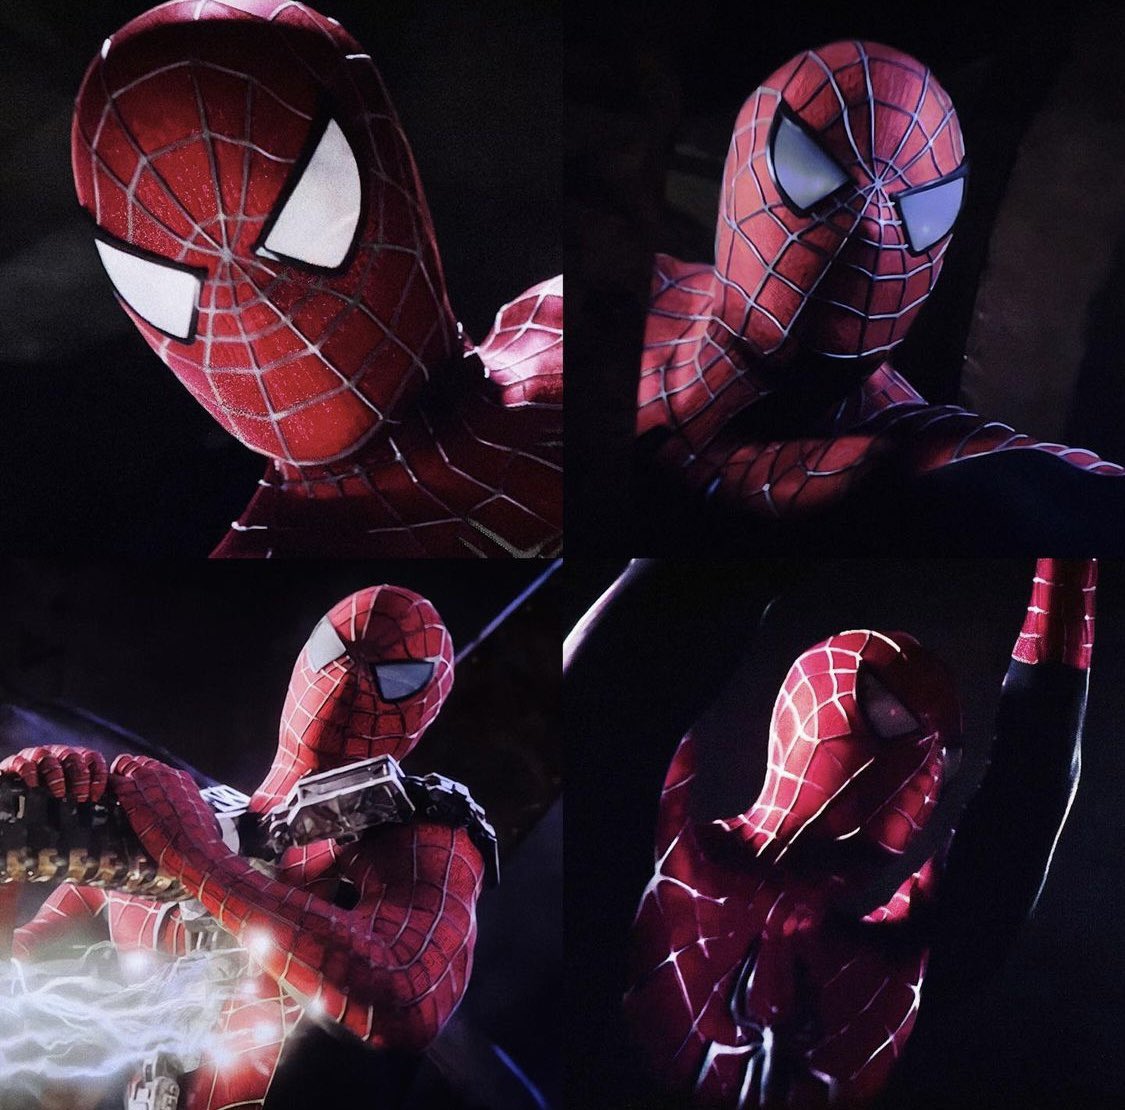 RT @Mar_Tesseract: Tobey Maguire’s Spider-Man suit in No Way Home https://t.co/26DZdaabNx